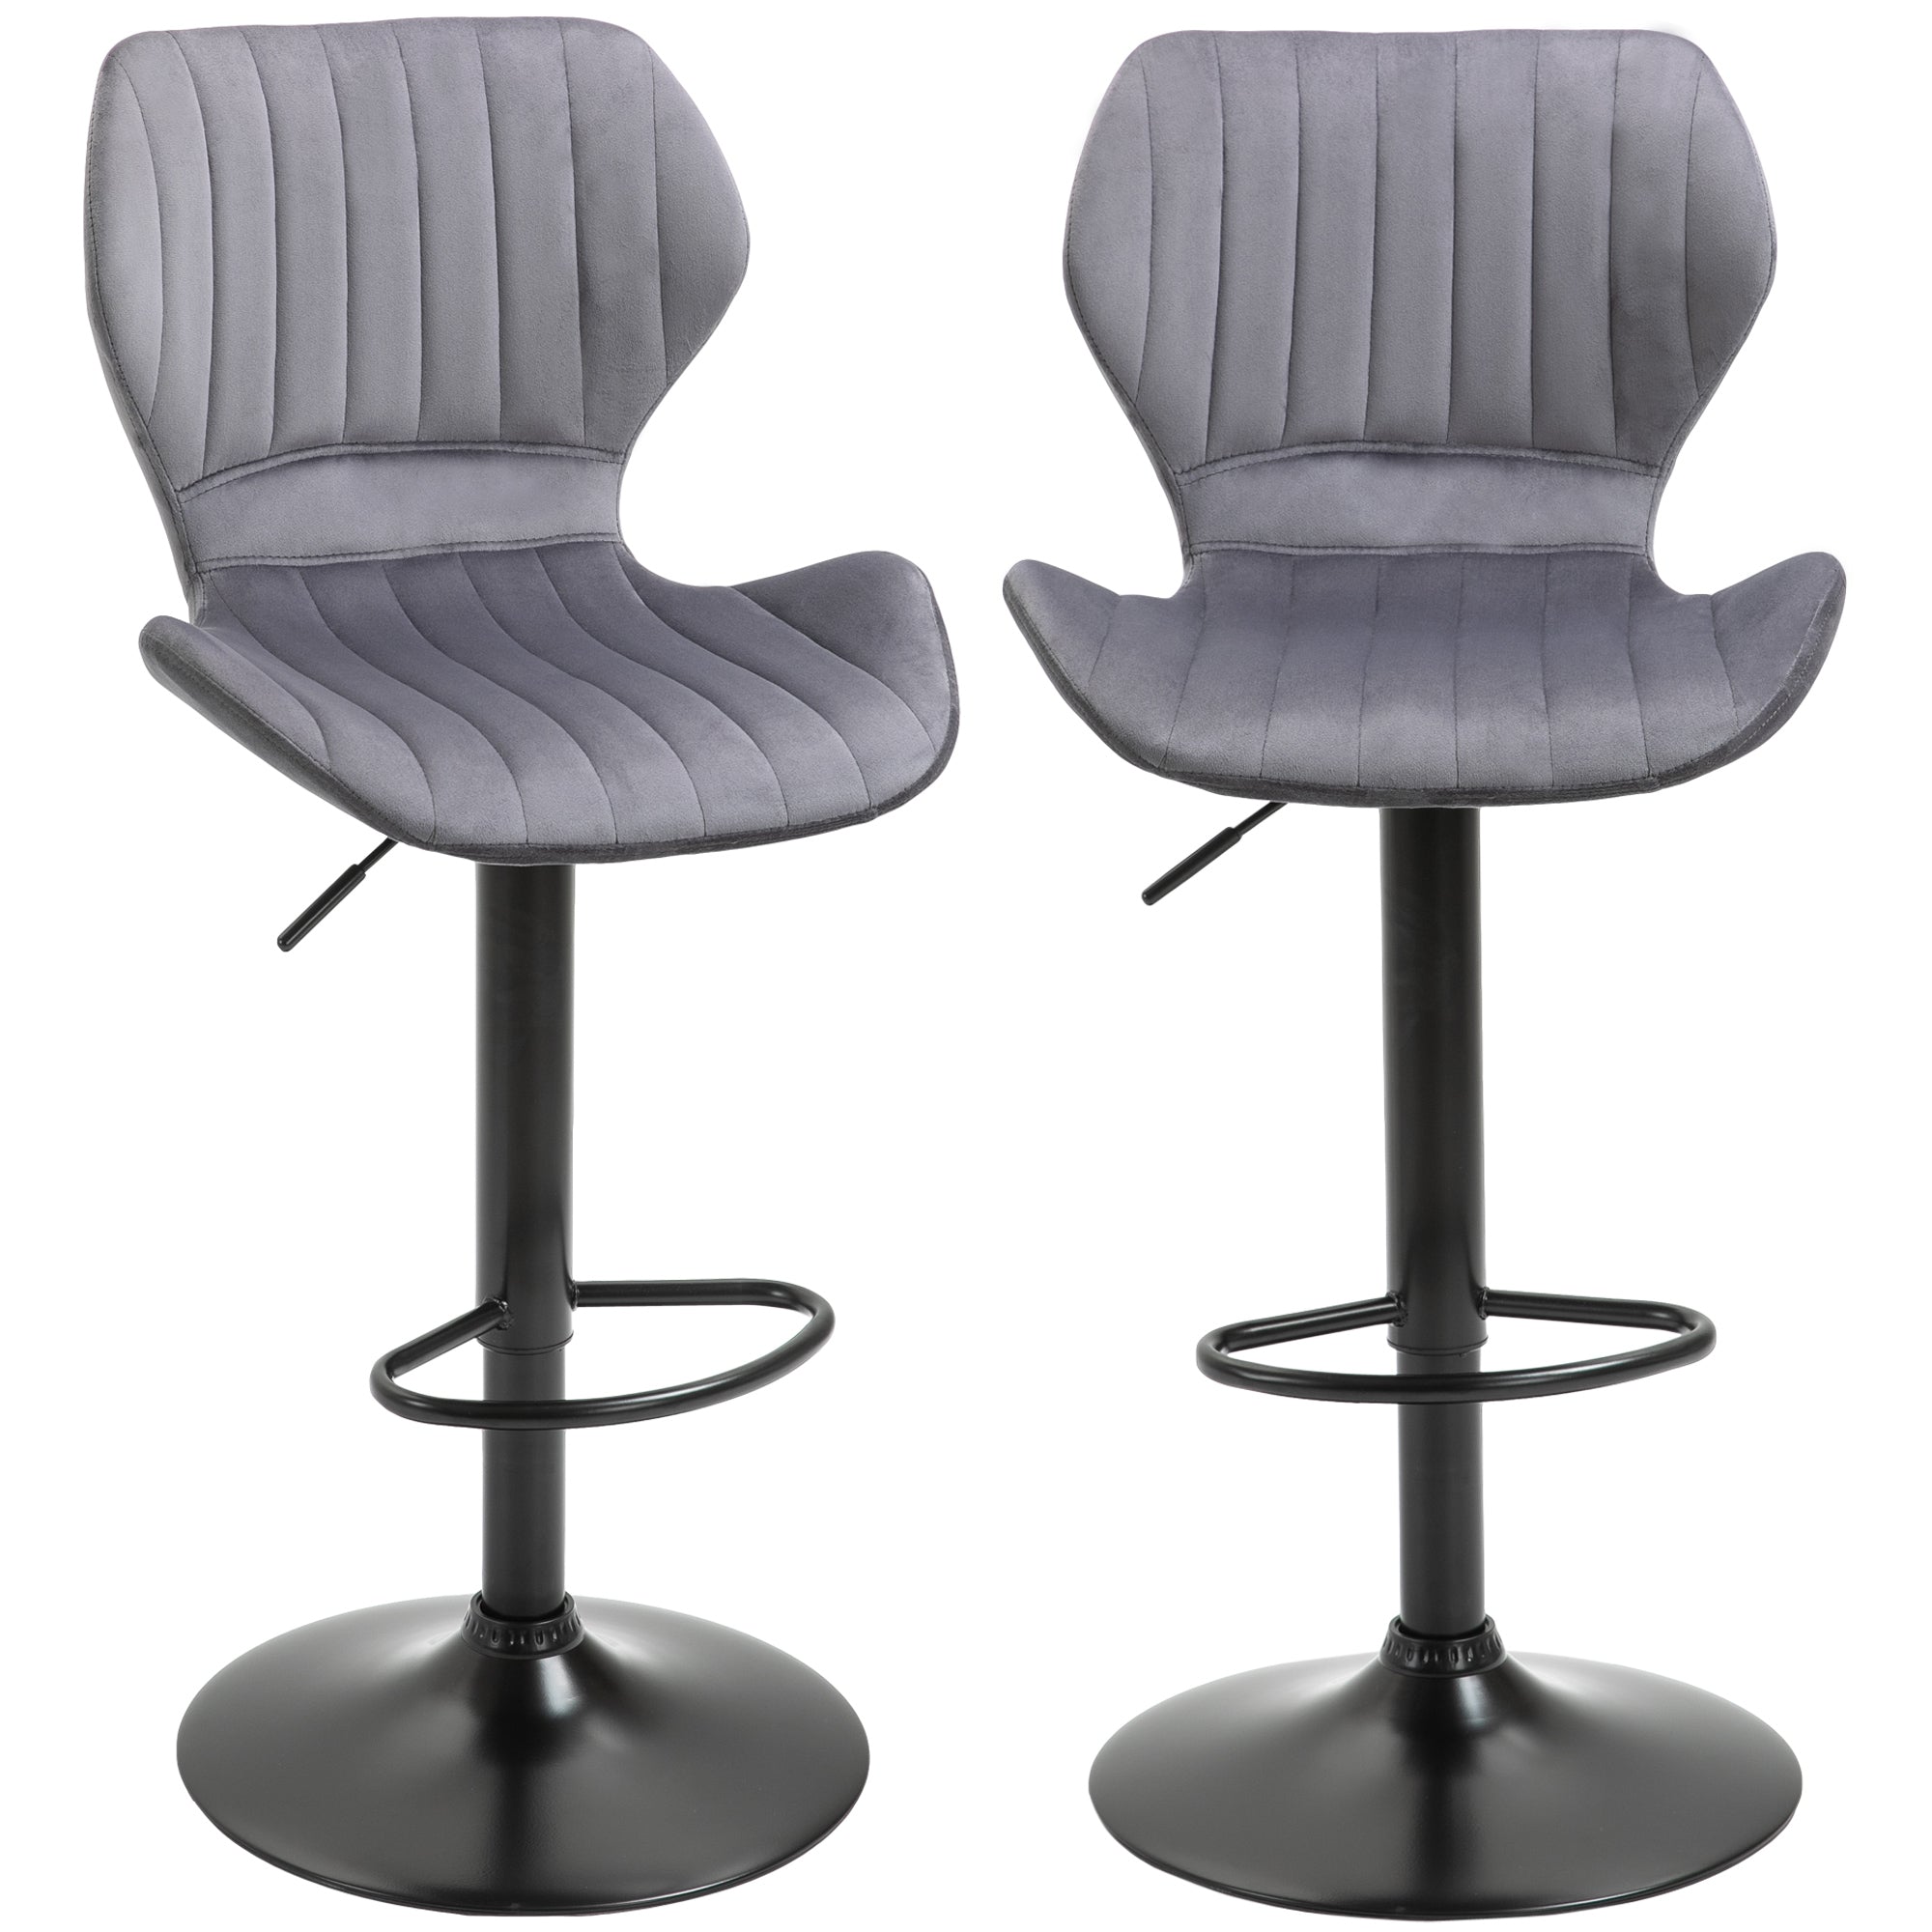 HOMCOM Bar Stool Set of 2 Velvet-Touch Fabric Adjustable Height Swivel Counter Chairs with Footrest, Grey - Inspirely